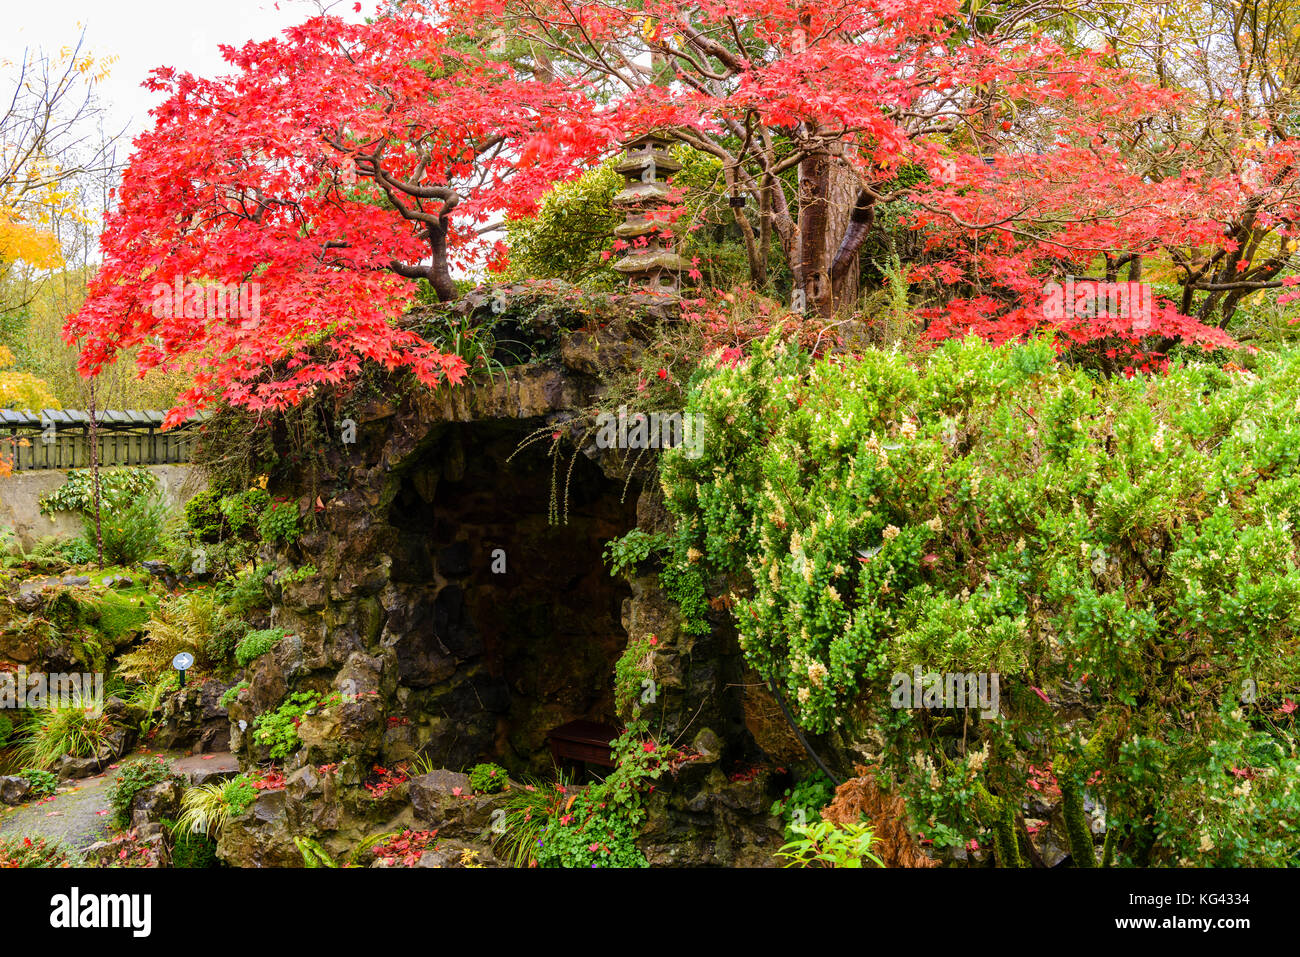 Acer Palmatium trees with red and orange foilage during autumn at the Japanese Gardens, Irish National Stud, Kildare Stock Photo